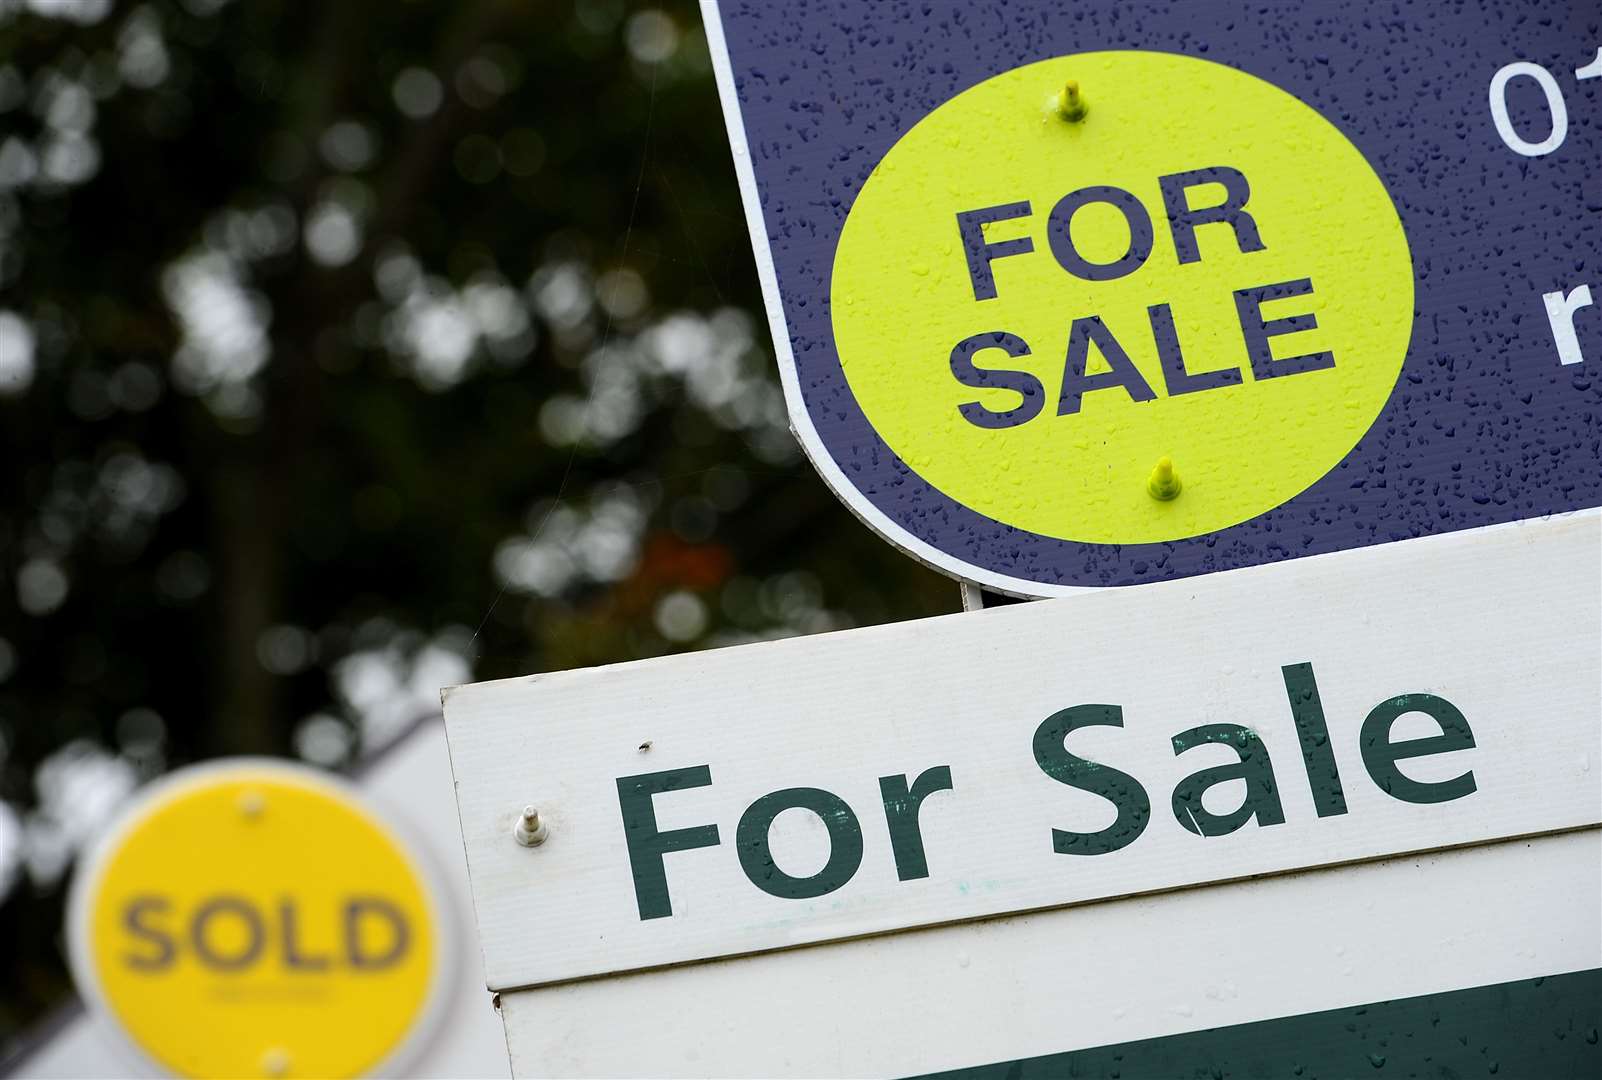 Property prices across the South East increased by 6.2% in the 12 months from November 2019